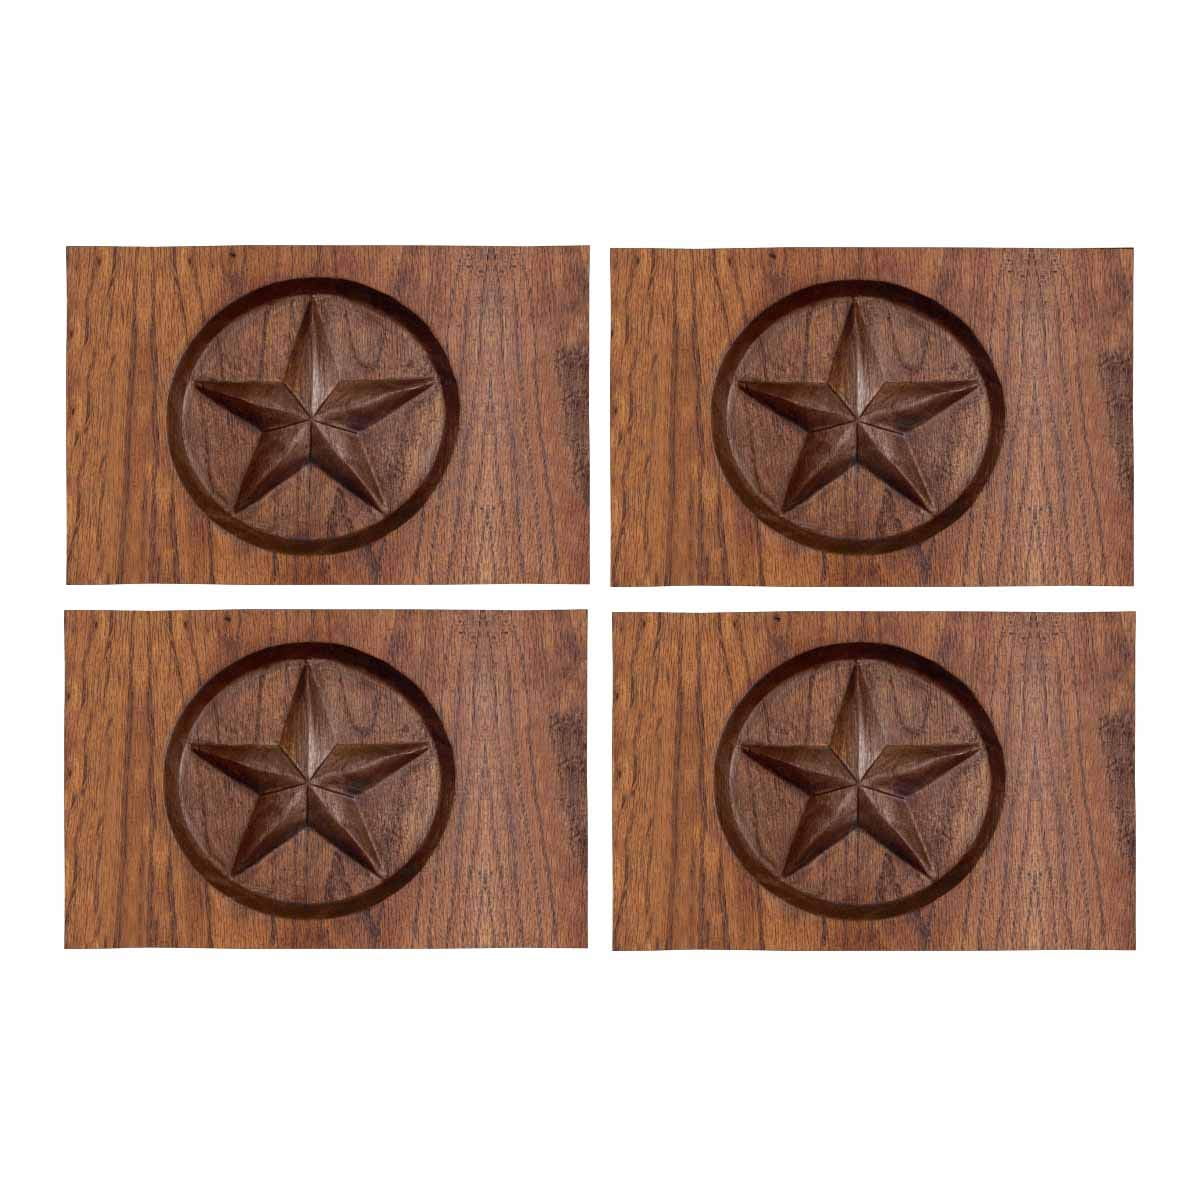 MKHERT Western Texas Star in Wood Placemats Table Mats for ...